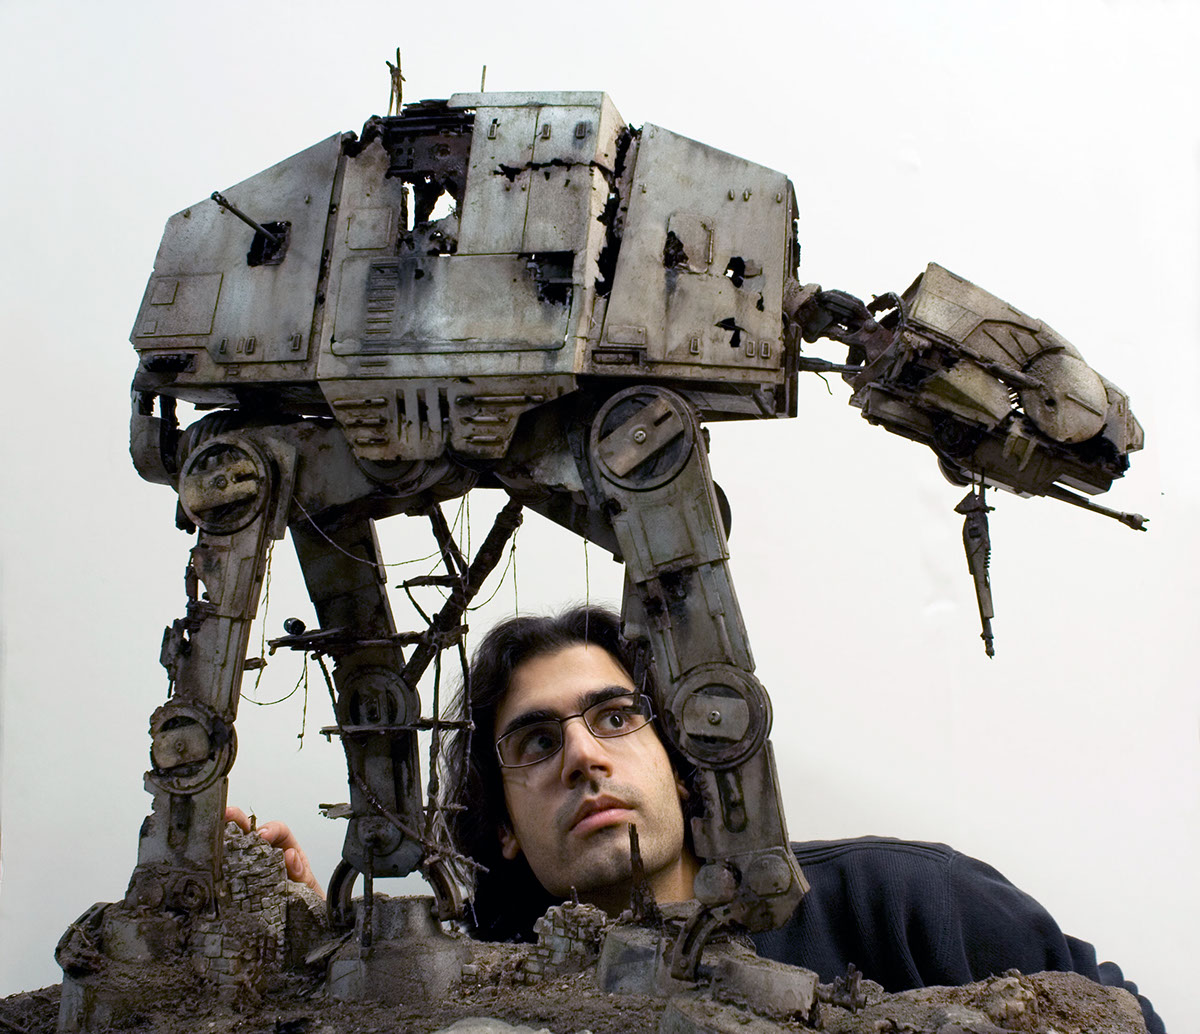 star wars model sci-fi AT-AT Diorama 3D Starwars derelict wrecked abandoned may 4th force refuge weathering